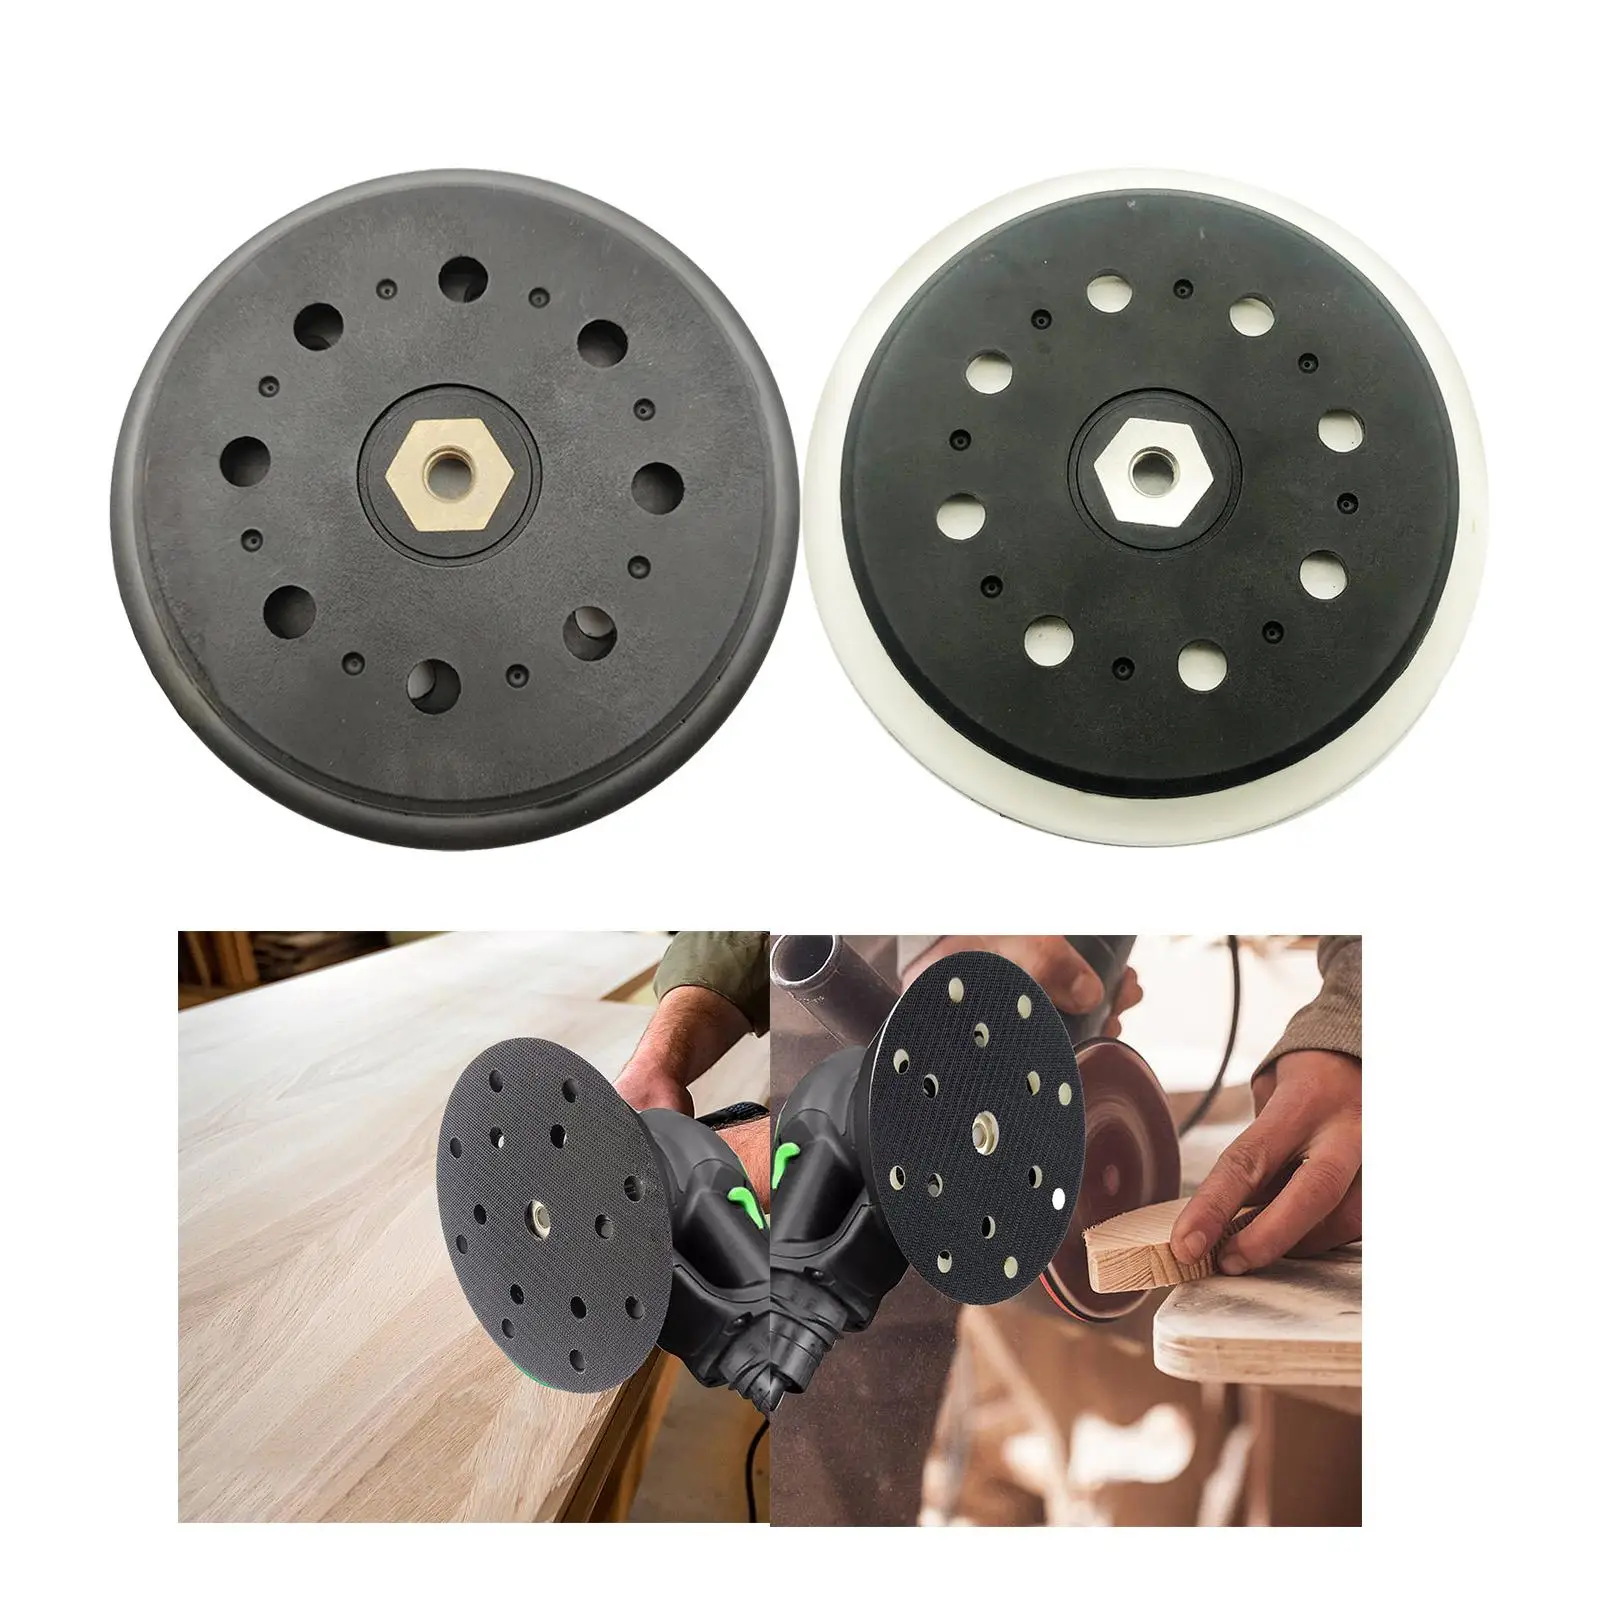 15 Hole Sanding Backing Plate Pad 148mm Sander Polisher Tool for Woodworking